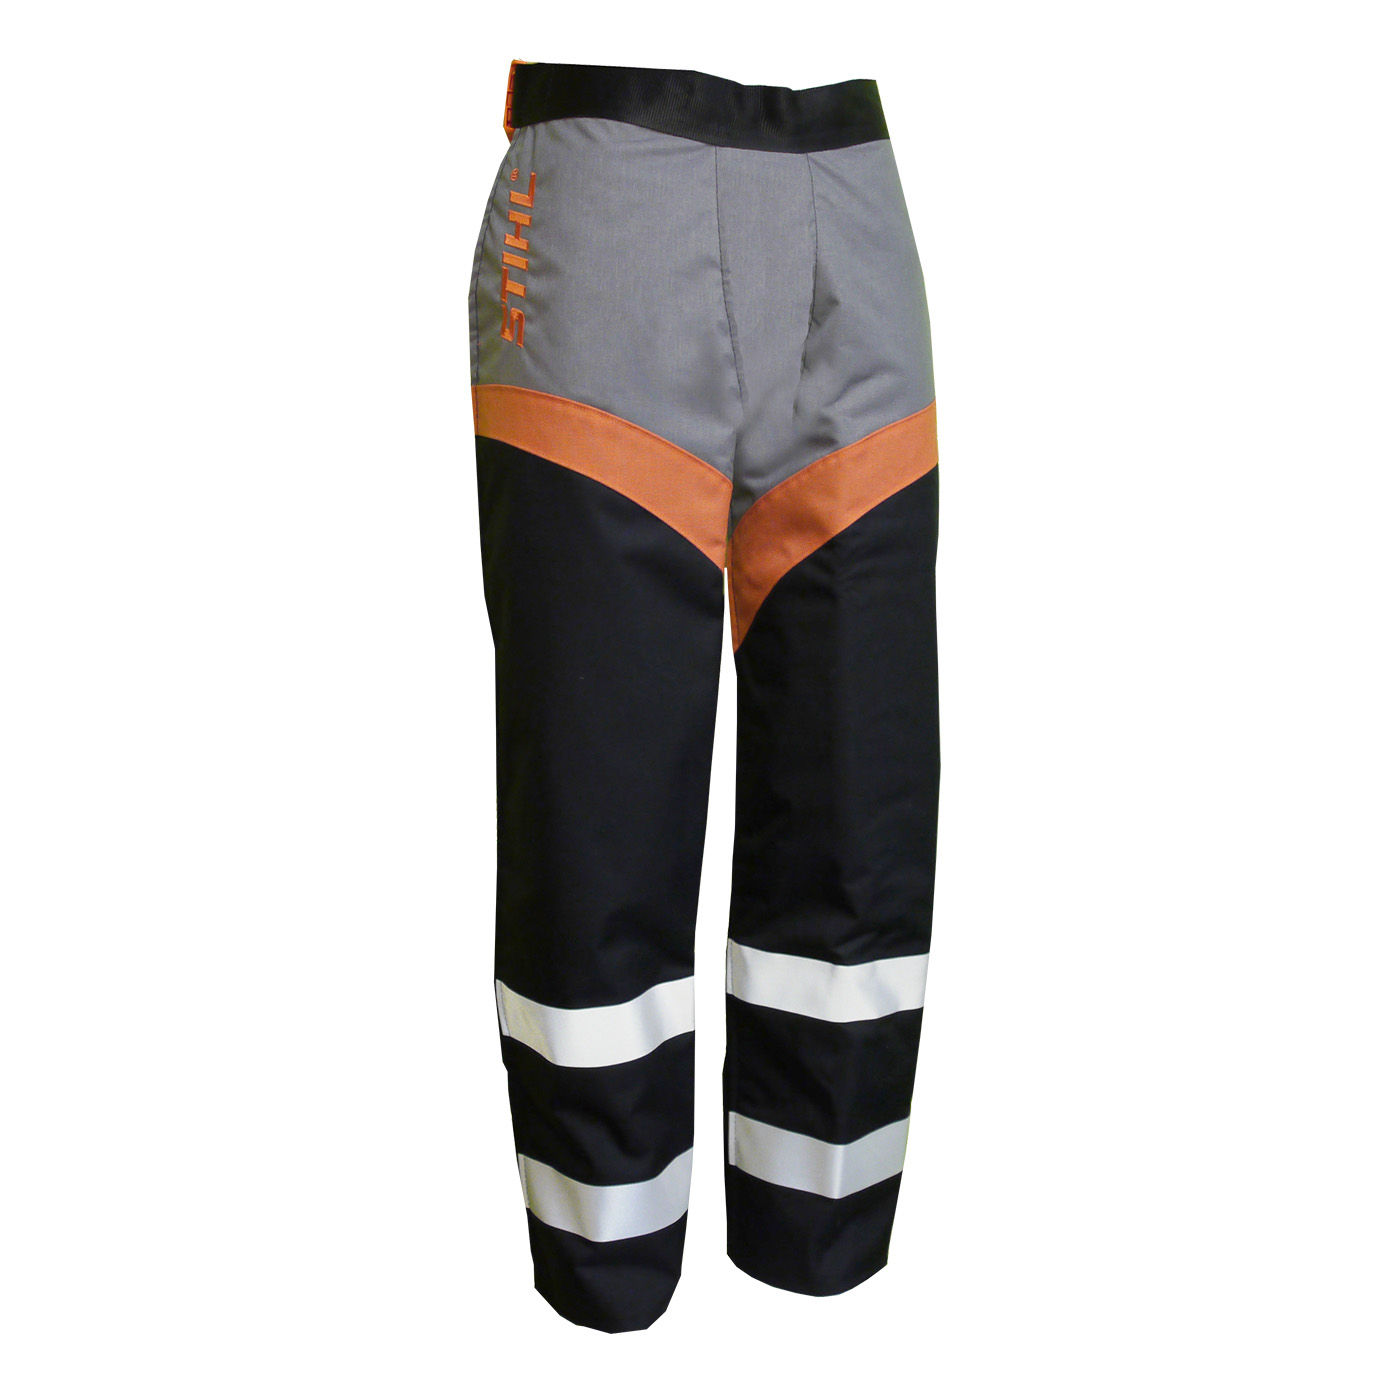 Stihl FS Protect Brushcutter Protective Trousers  m  Amazonde Garden